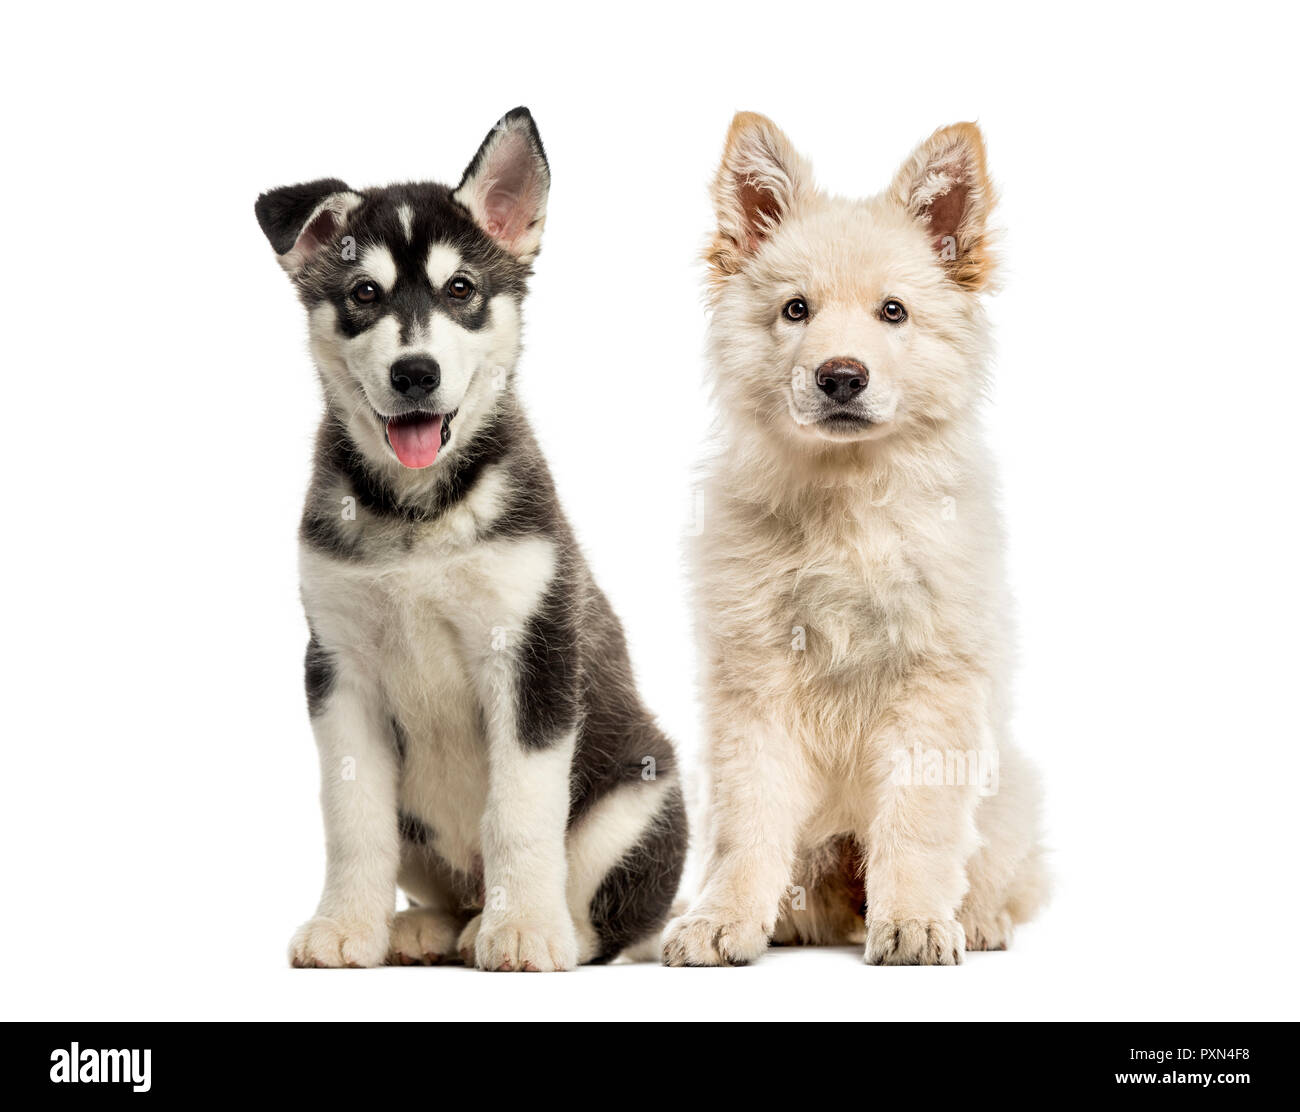 Chiot Berger Blanc Suisse, Husky chiot malamute, in front of white background Banque D'Images